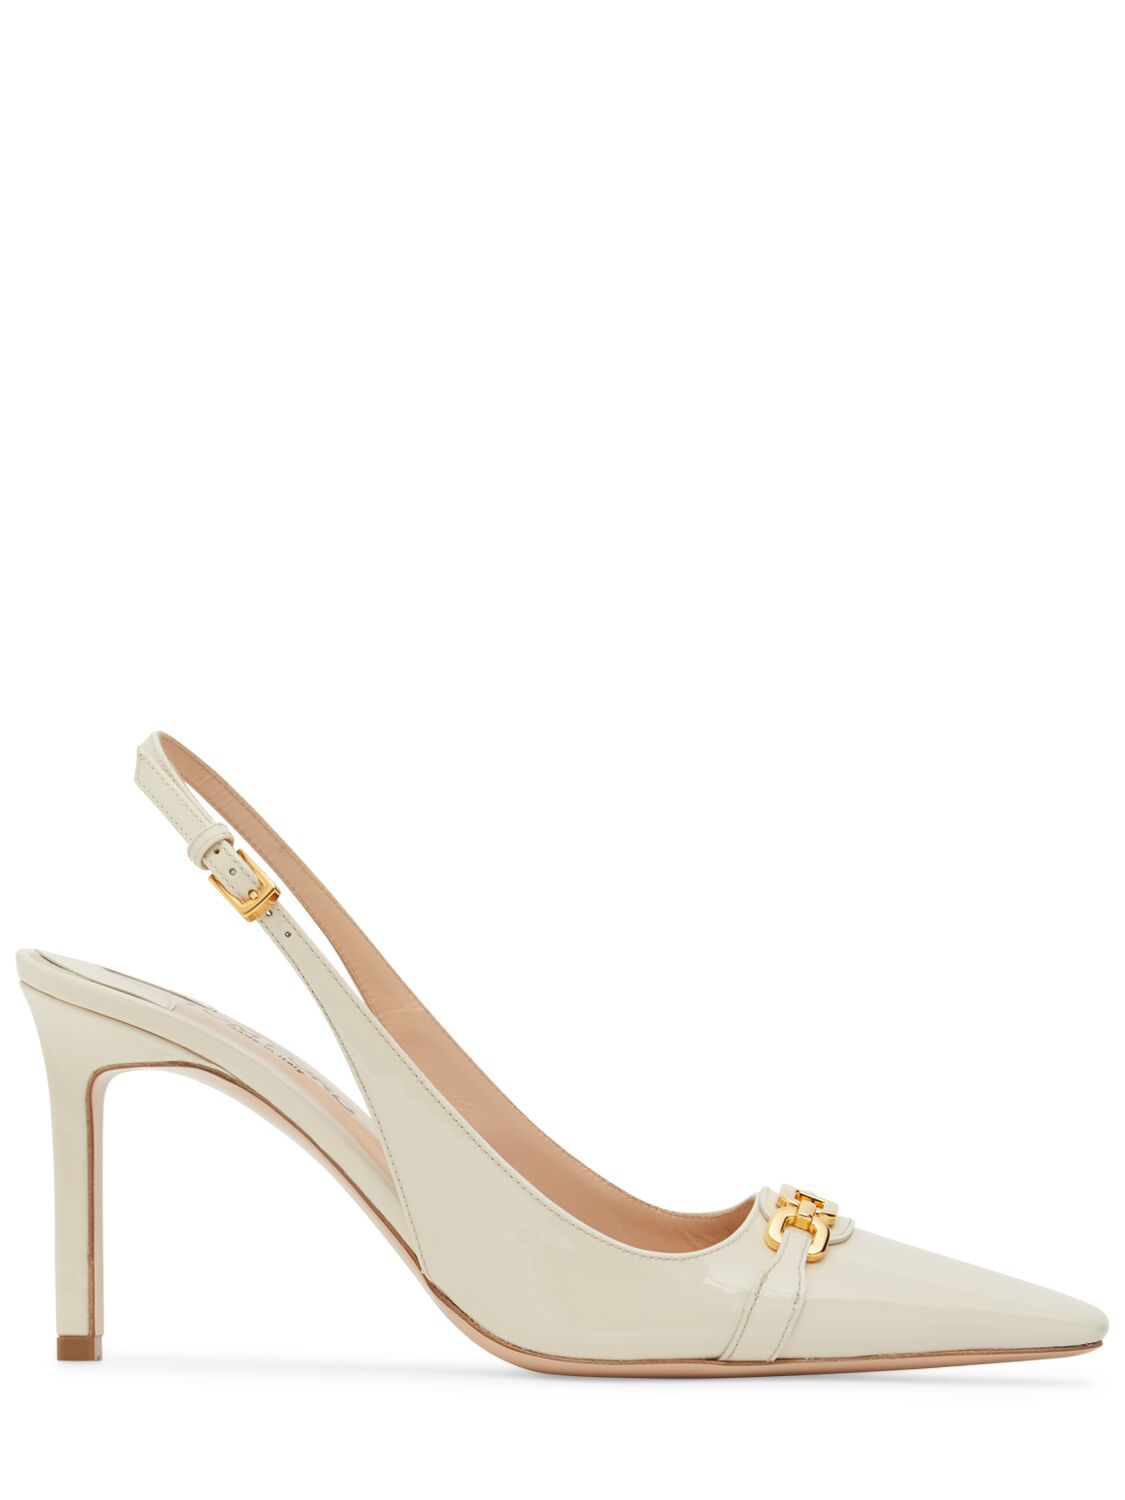 Tom Ford 85mm Patent Leather Slingbacks In Ivory